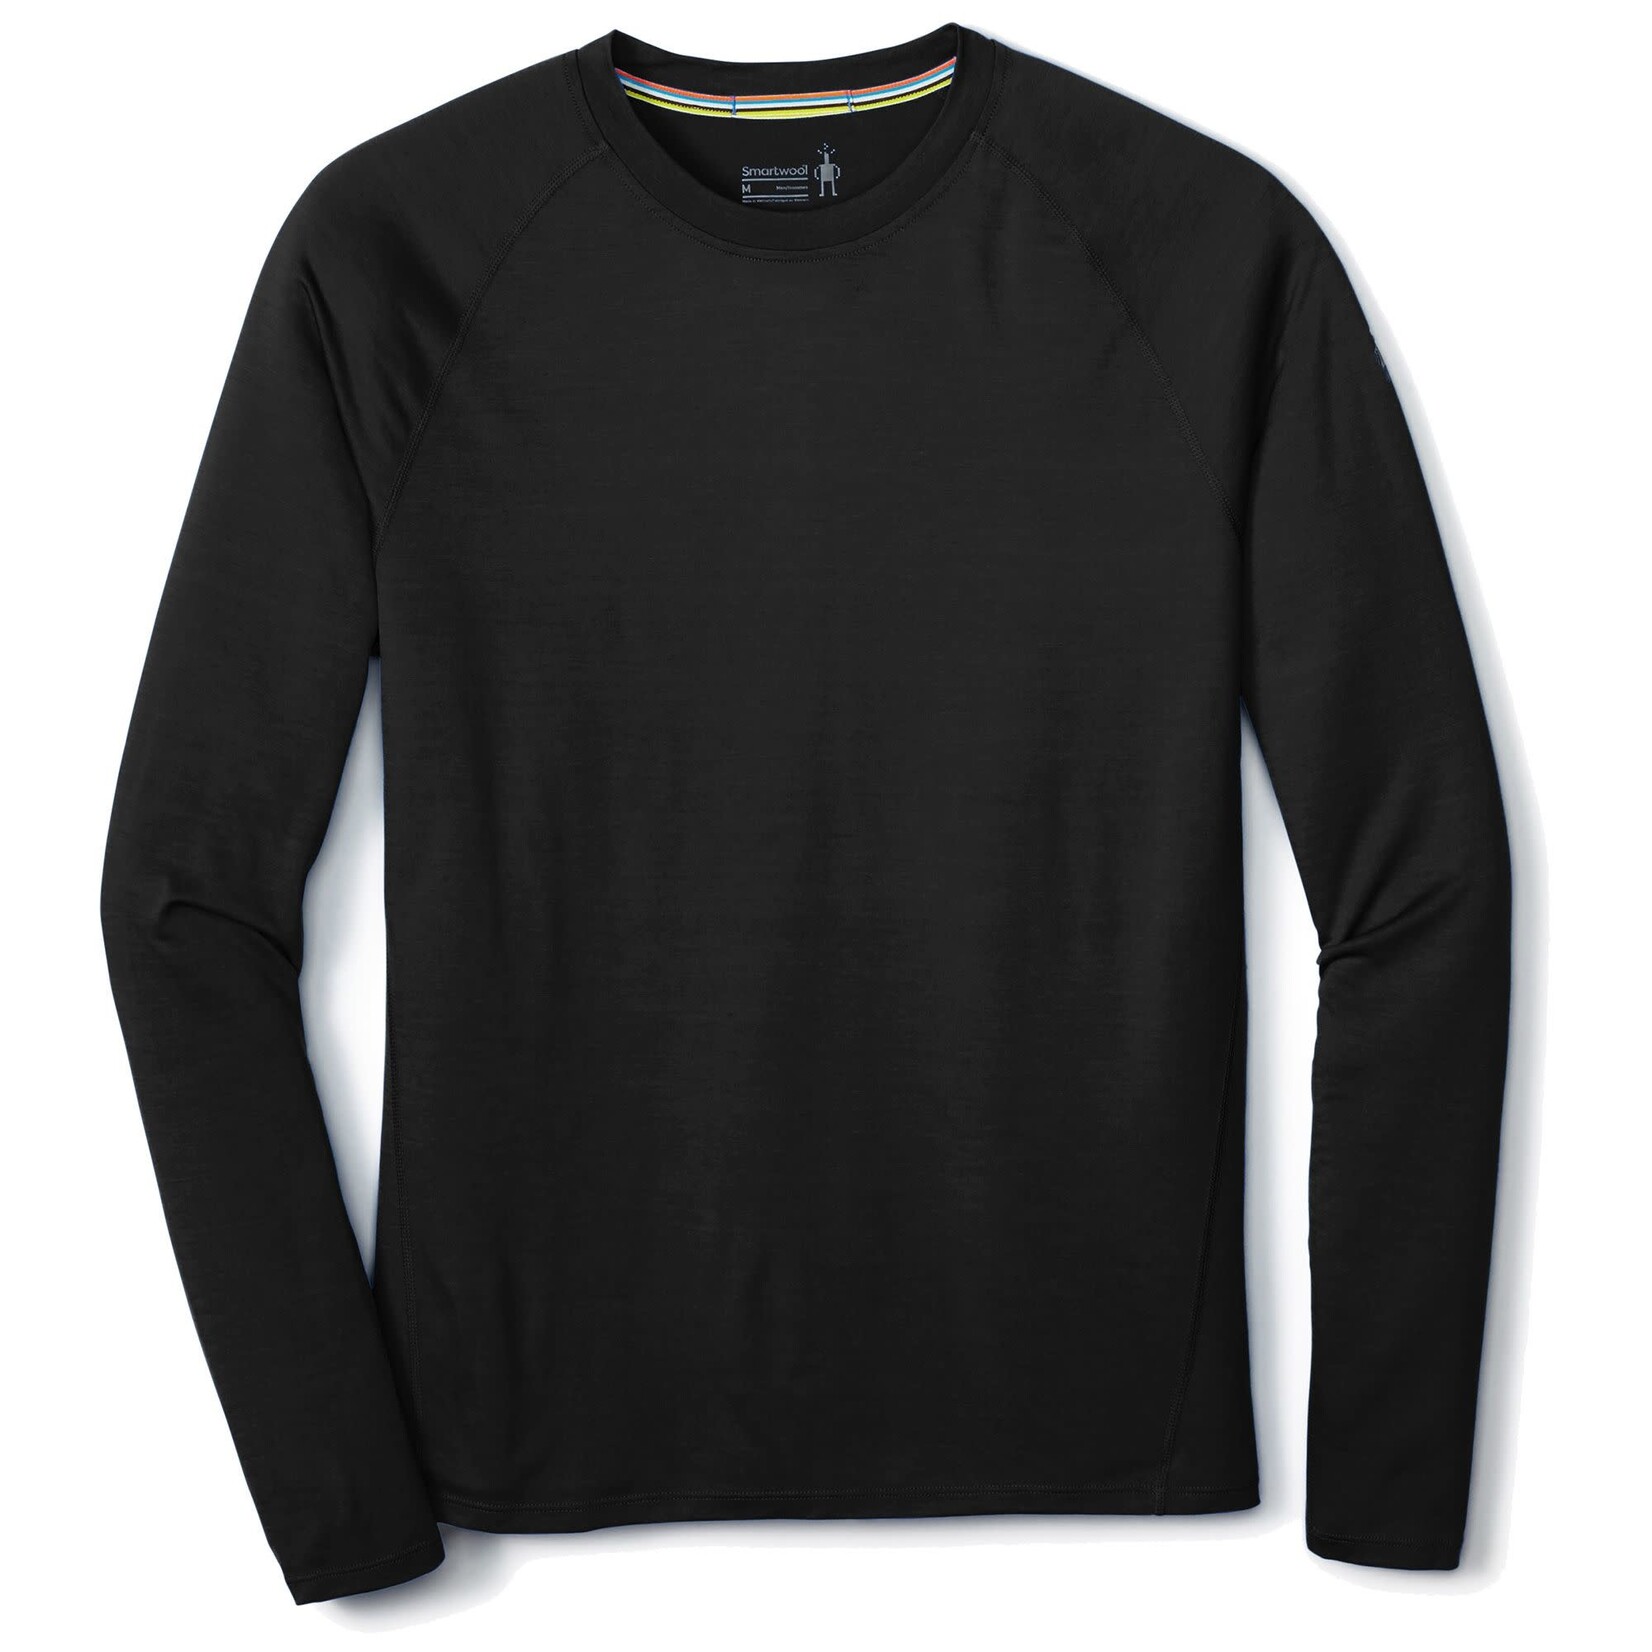 Smartwool Men's Classic All-Season Merino Base Layer Long Sleeve Boxed (chandail merinos 150 à manches longues pour hommes)